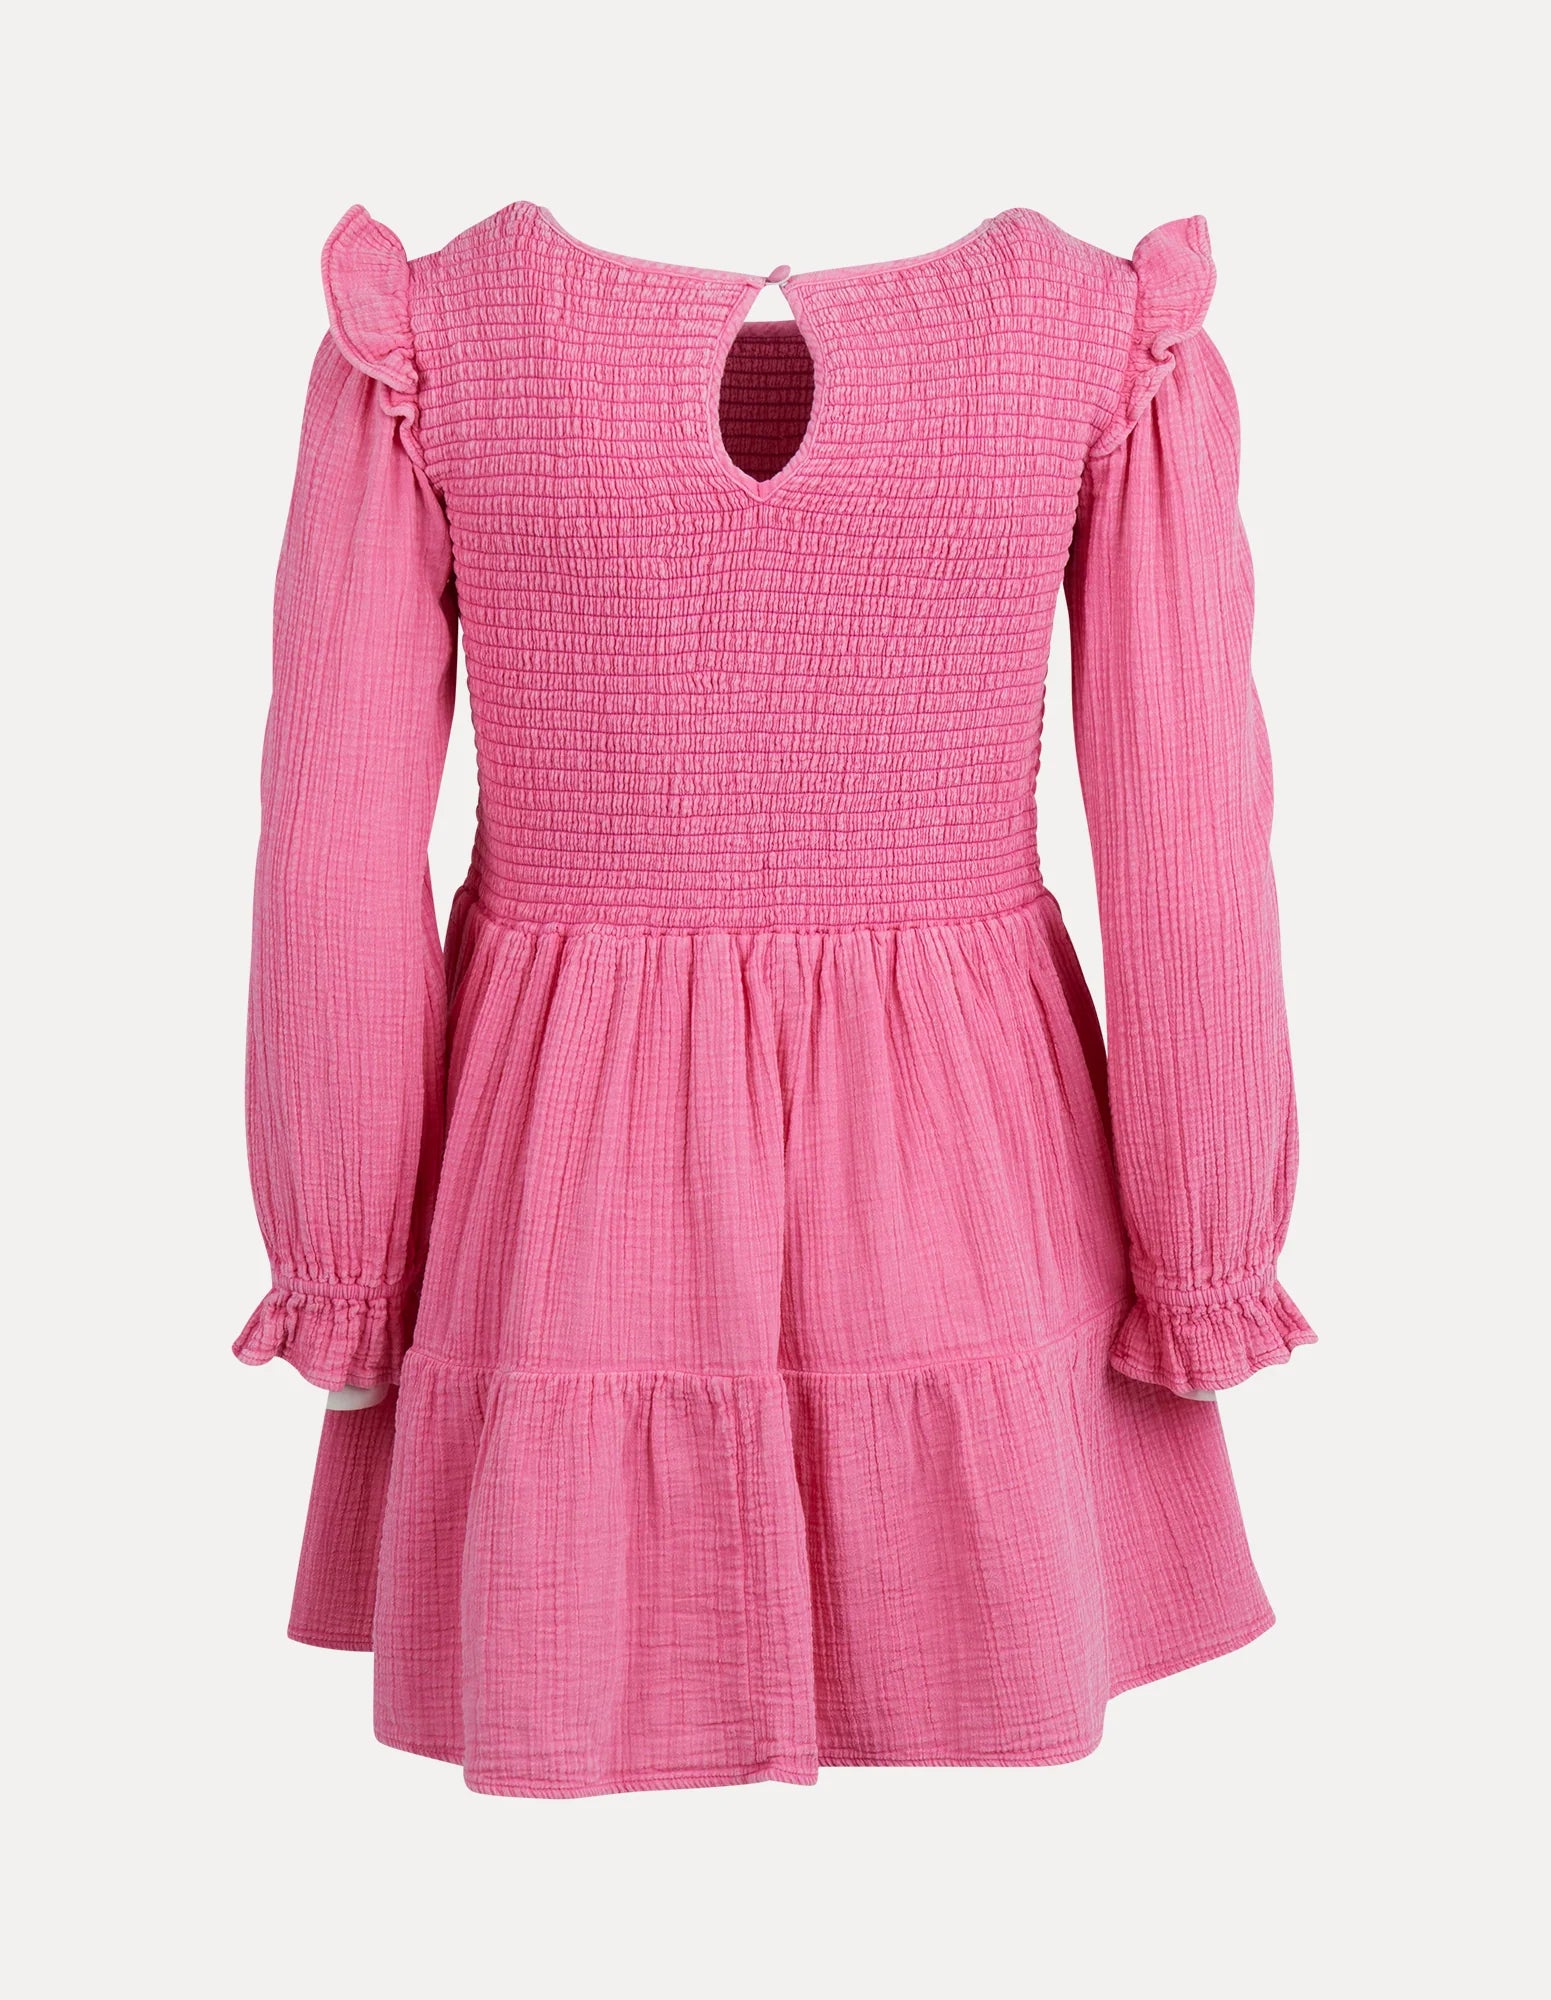 Ivy Dress - Pink | Laurie Claire Kids